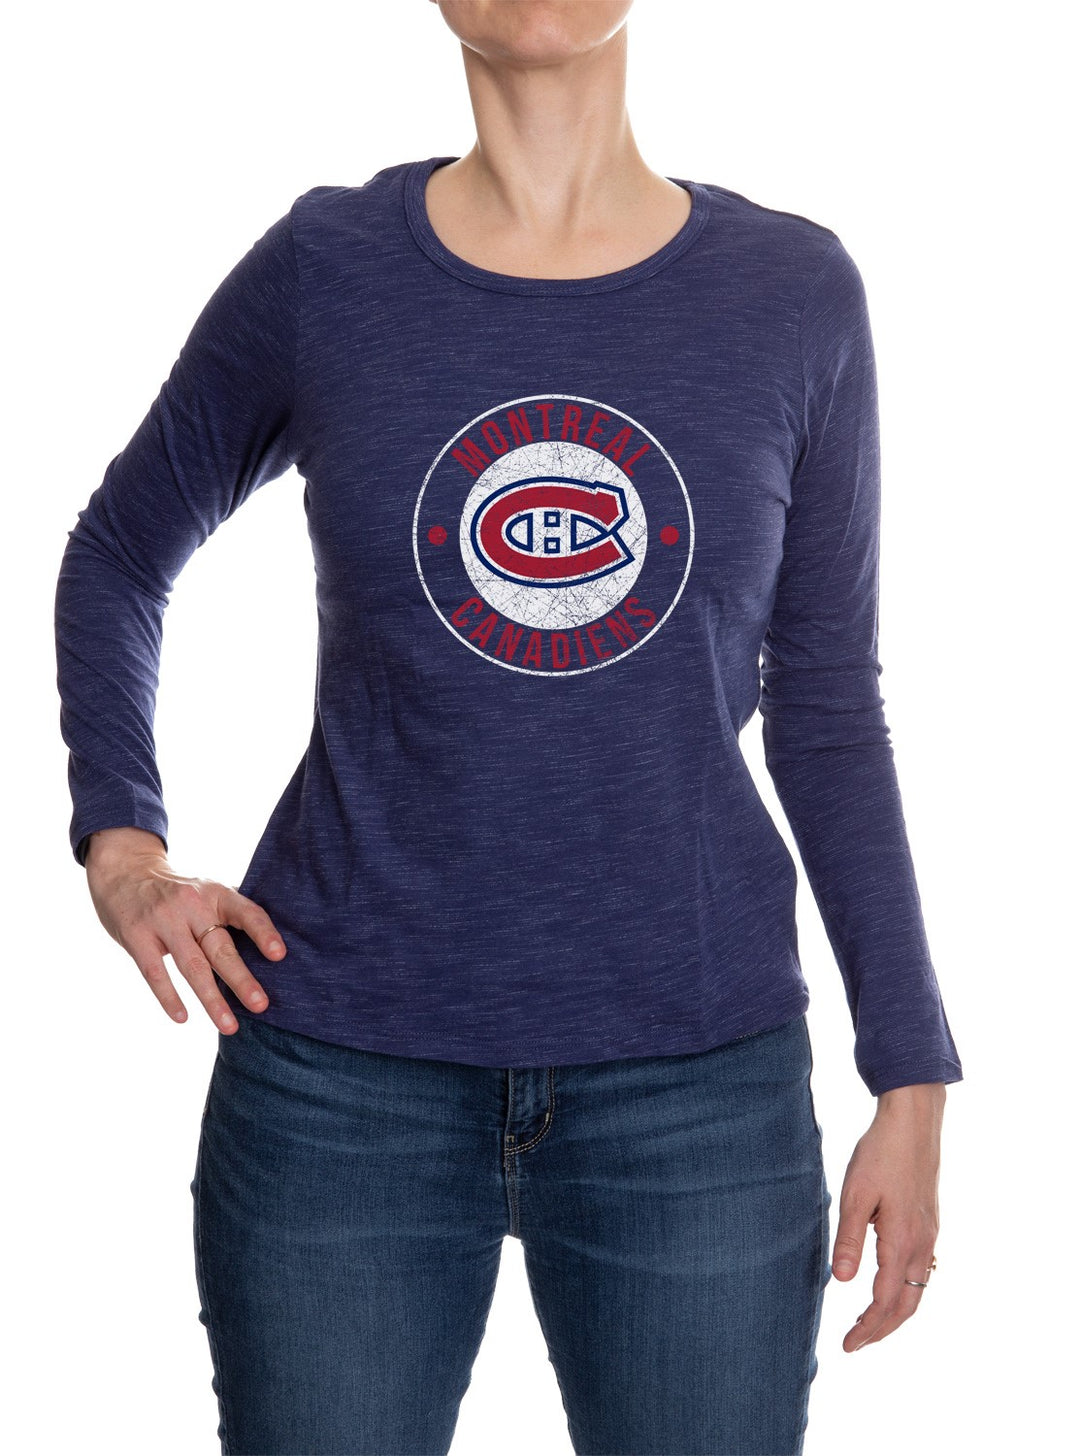 Montreal Canadiens Long Sleeve Shirt for Women in Blue Front View